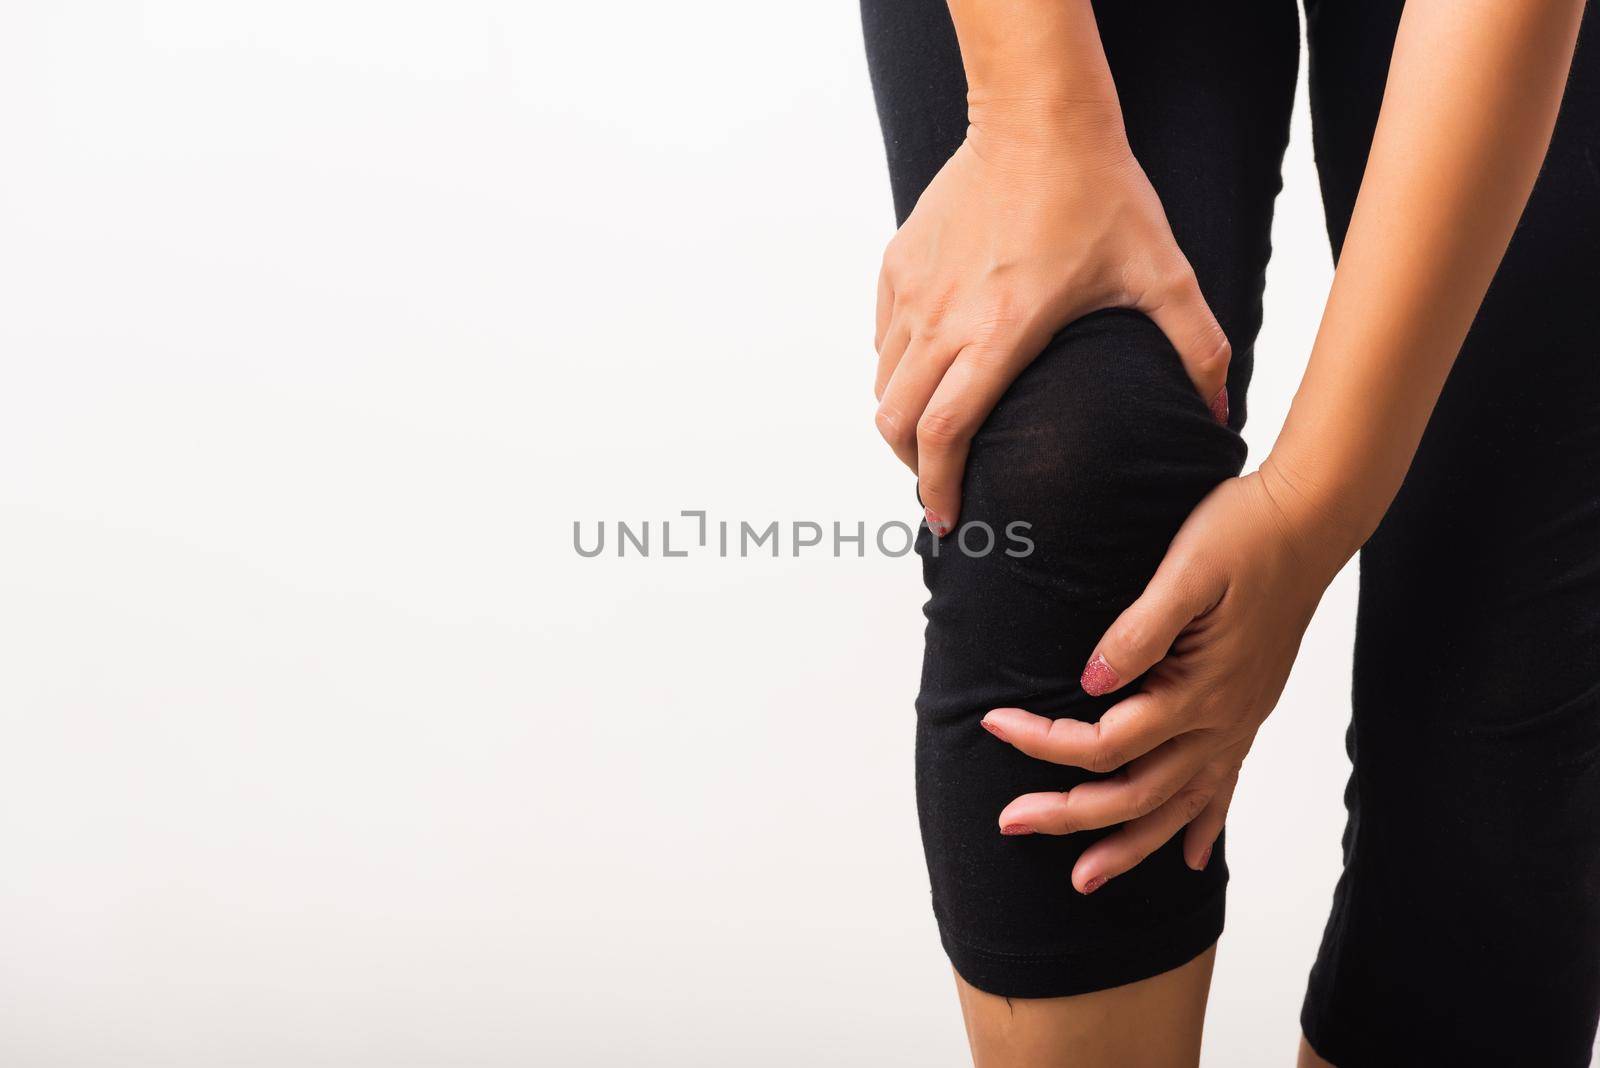 Closeup young woman aches to suffer from pain knee and she uses hand joint hold knee agony, studio shot isolated on white background Rheumatism healthcare and medical physiotherapy therapy concept